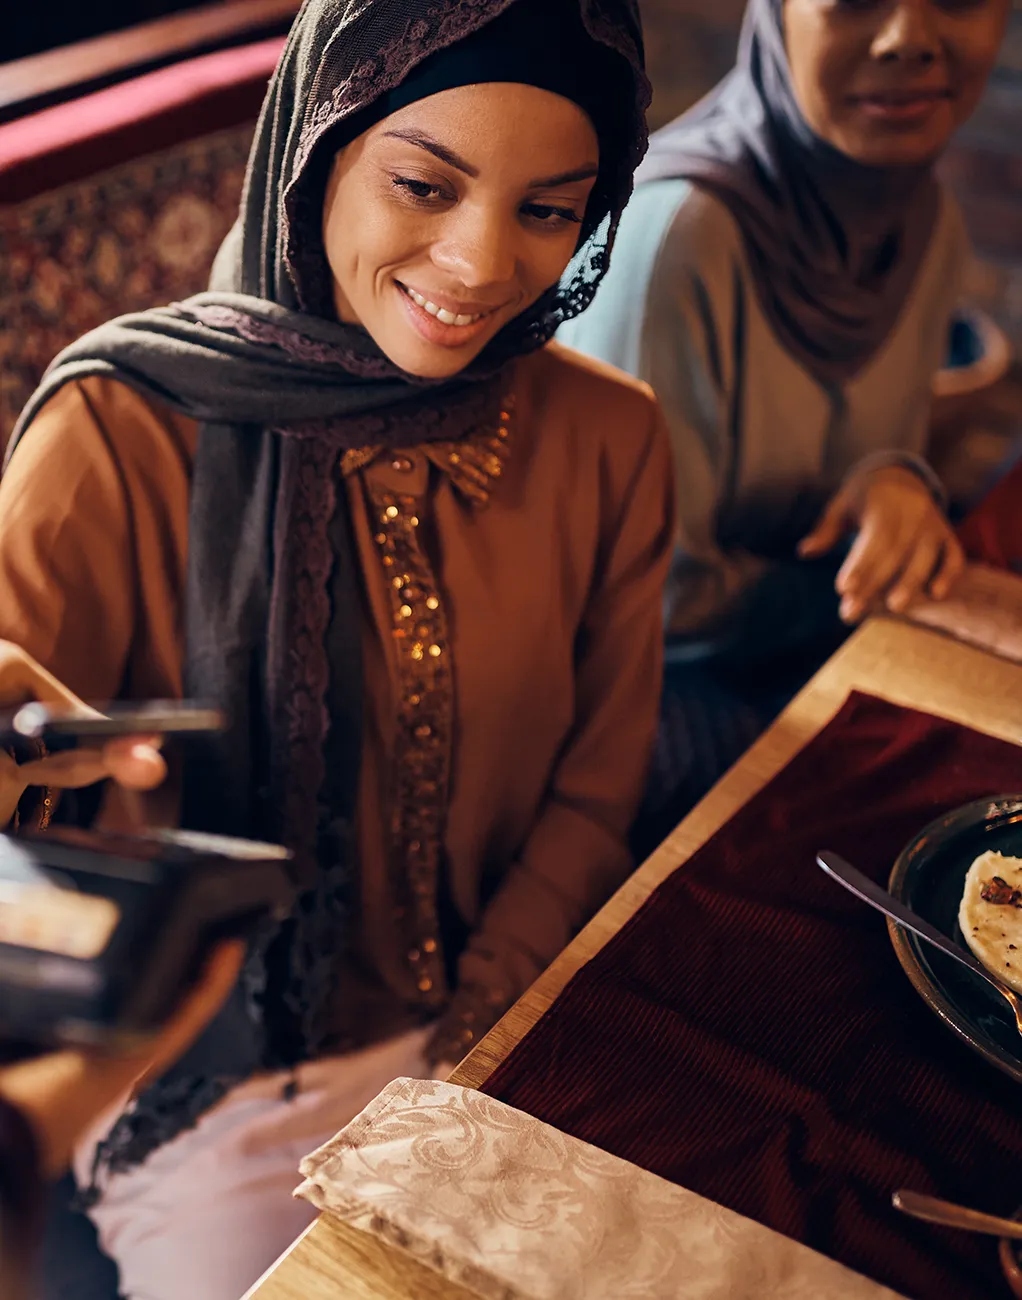 A woman paying for her meal at a restaurant.